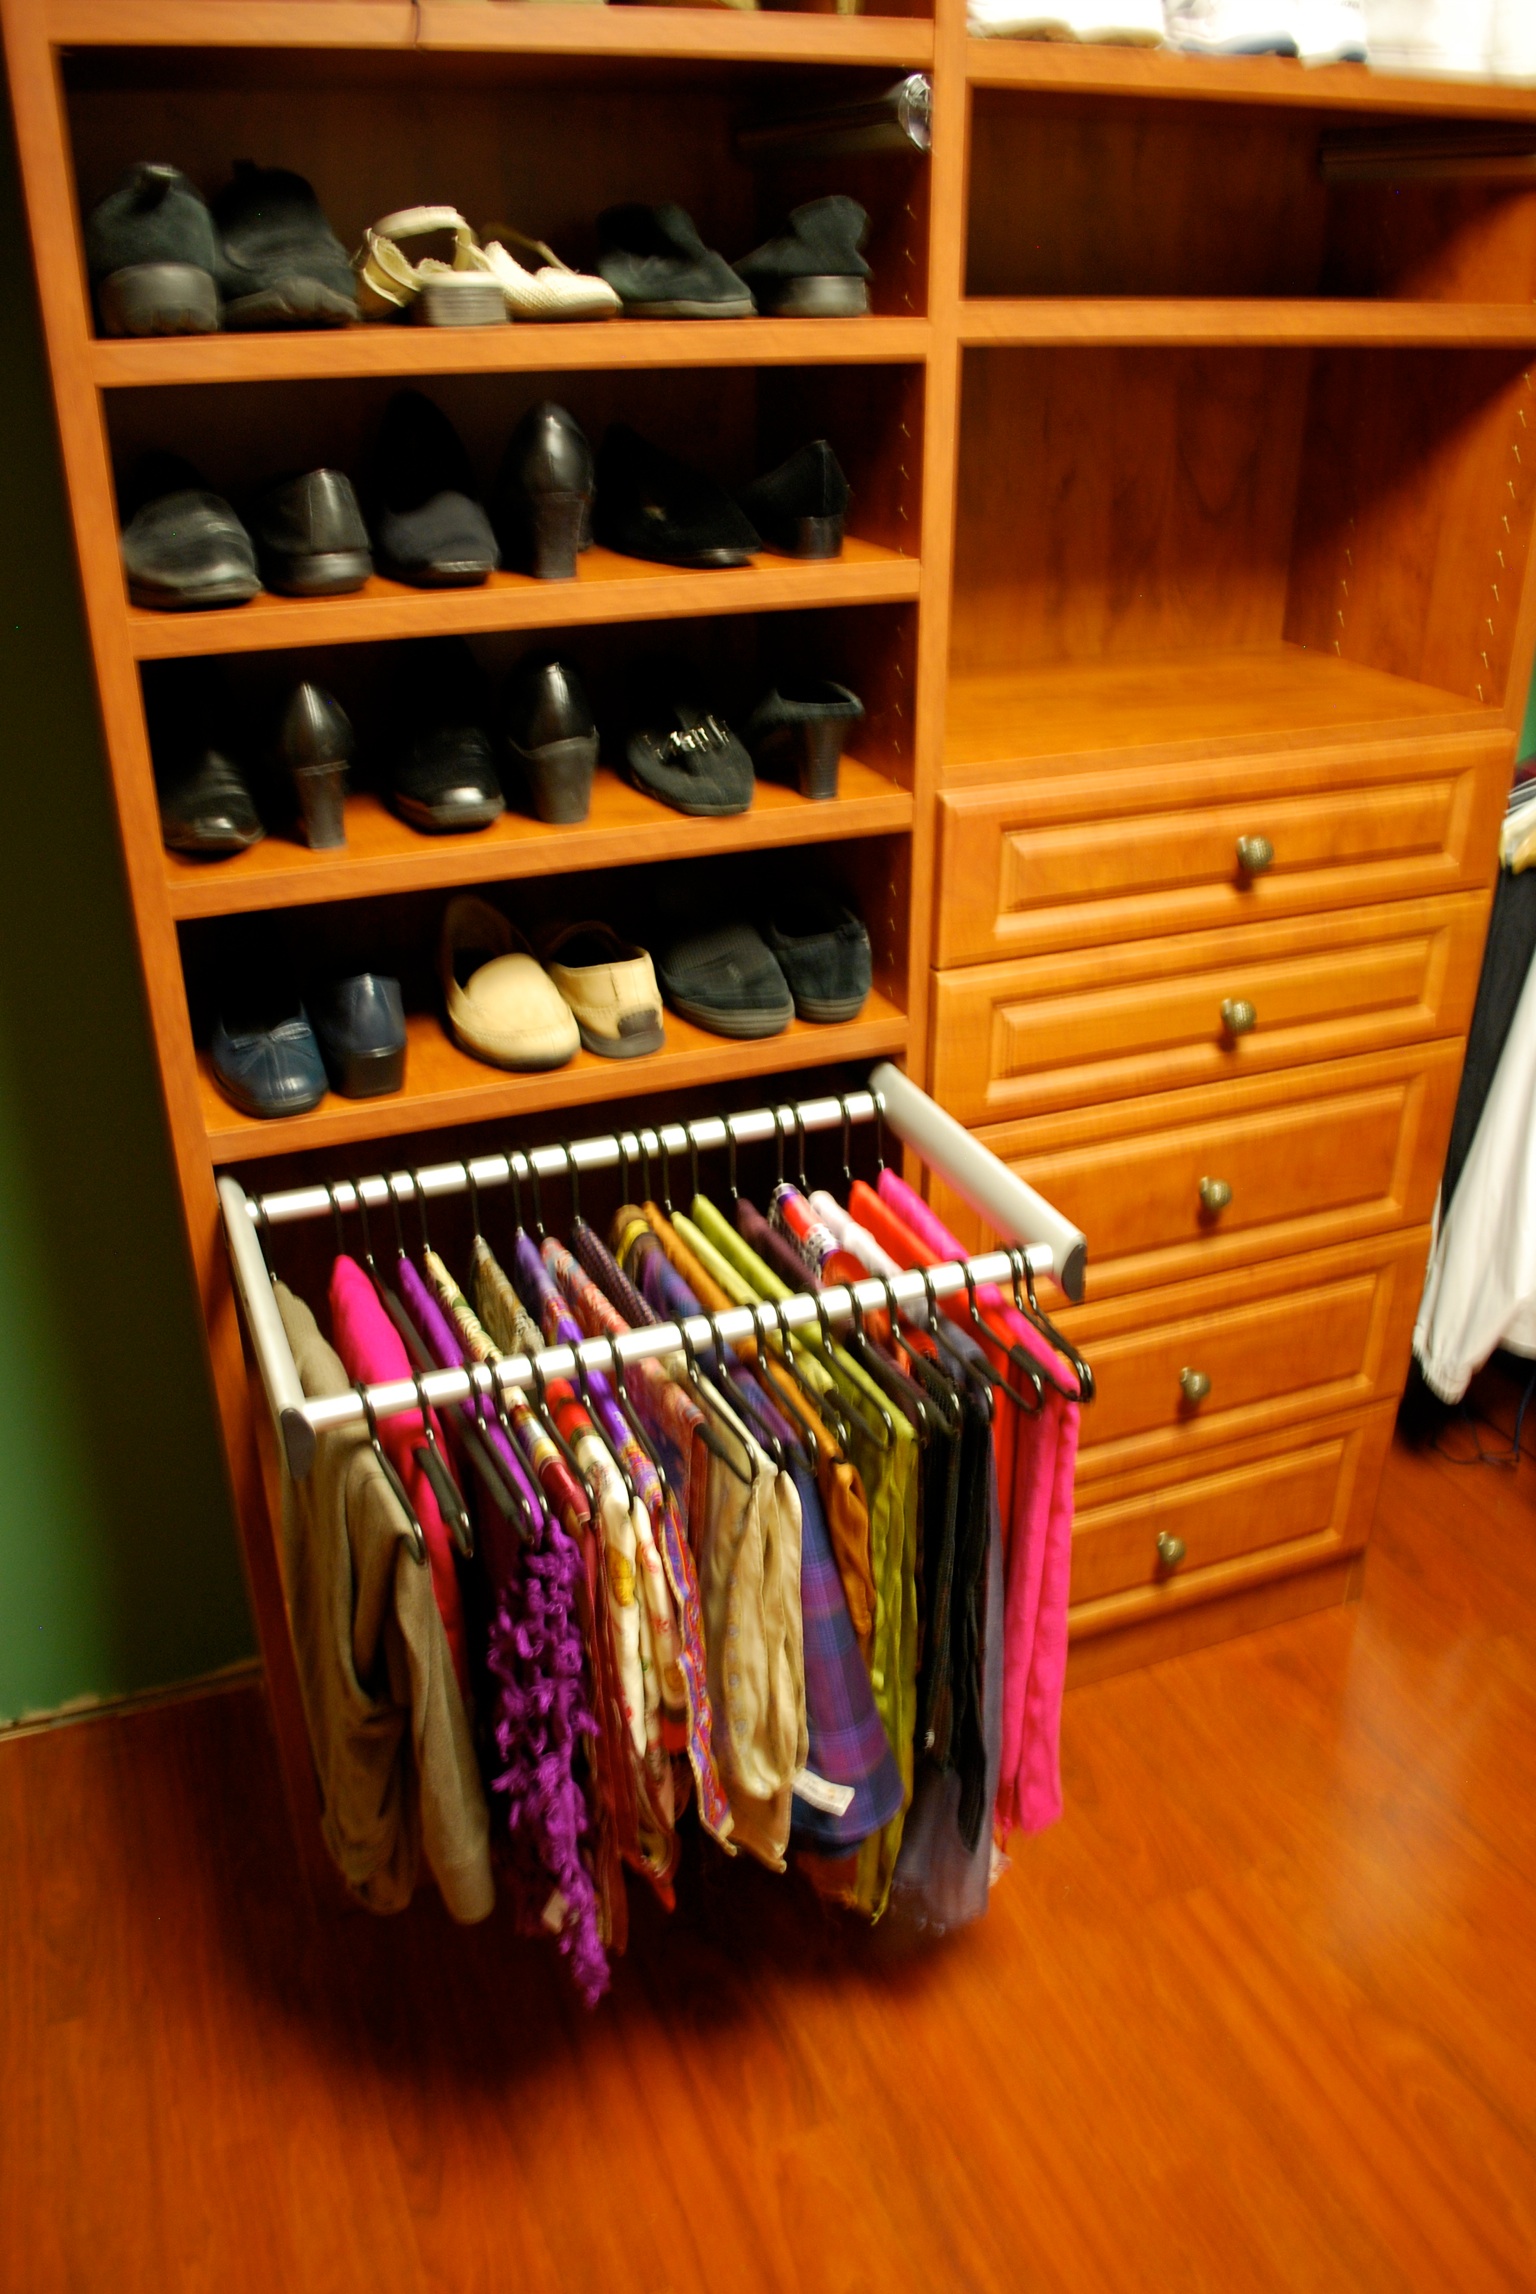 Walk In Closet Designs For Every Personality Type photo - 7